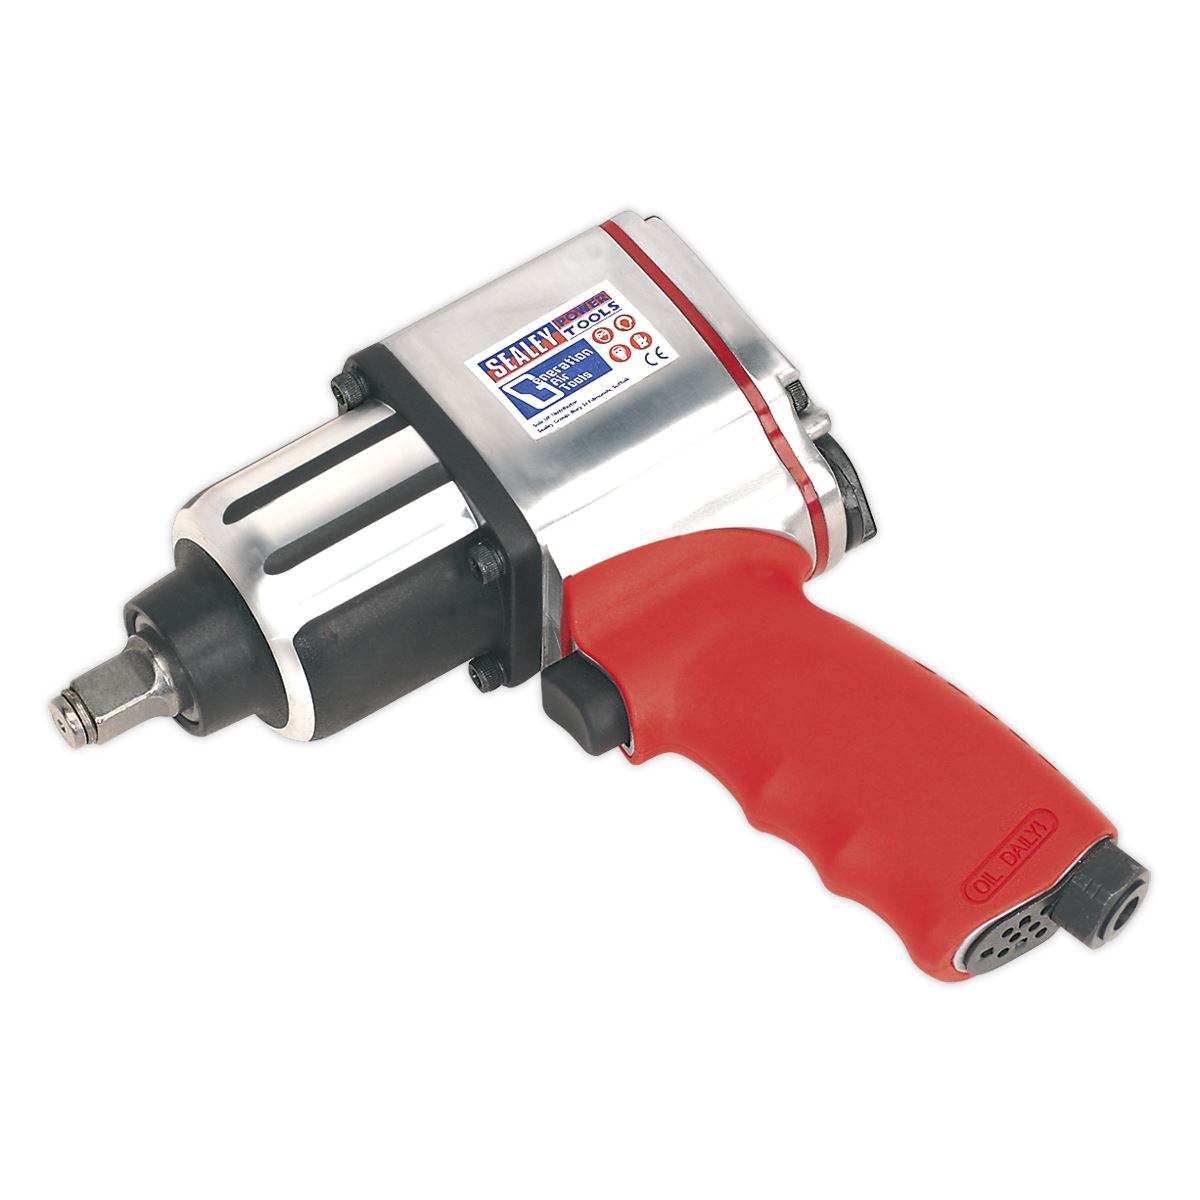 Generation Air Impact Wrench 1/2"Sq Drive - Twin Hammer